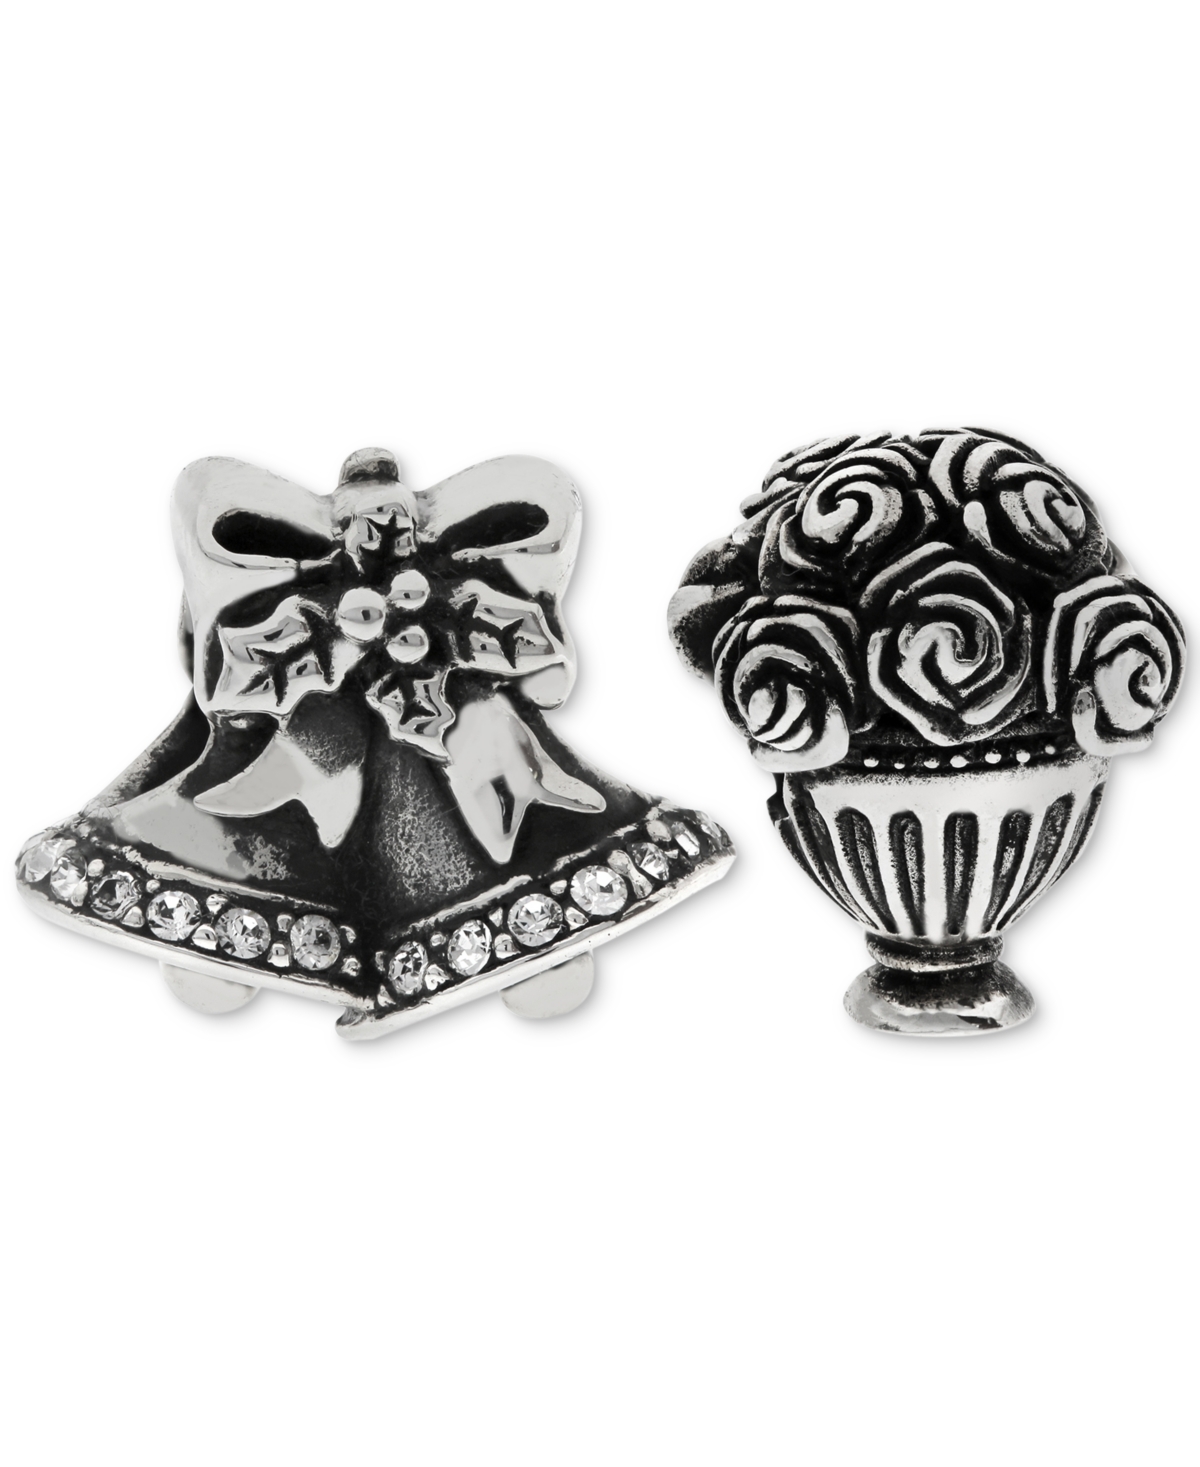 2-Pc. Set Wedding Bells & Bouquet Bead Charms in Sterling Silver - Silver